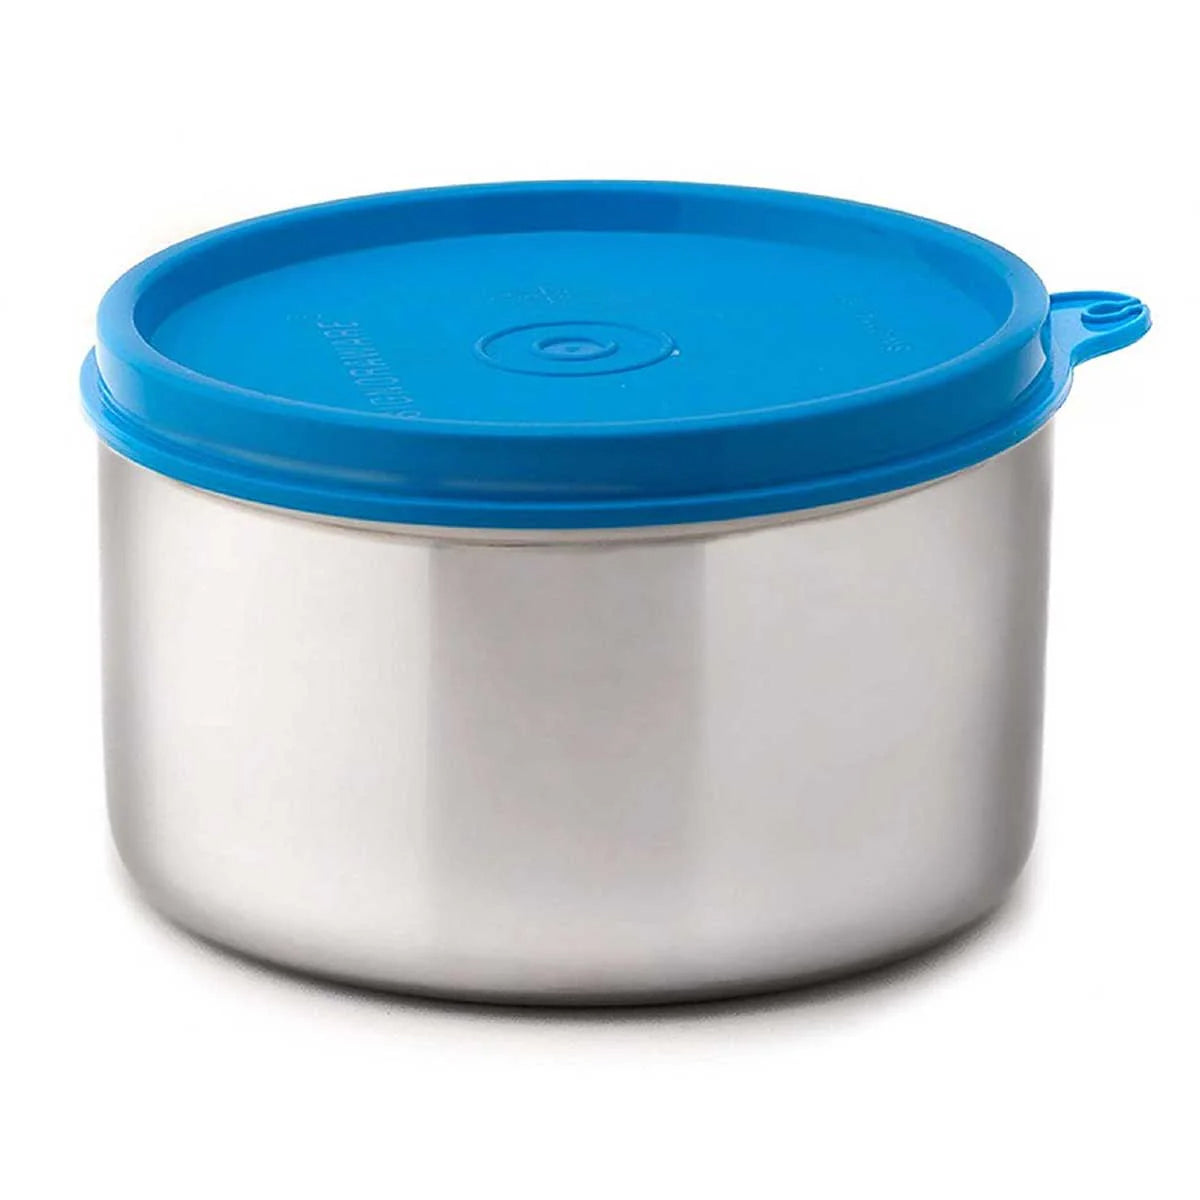 Signoraware Executive Steel Stainless Steel Container